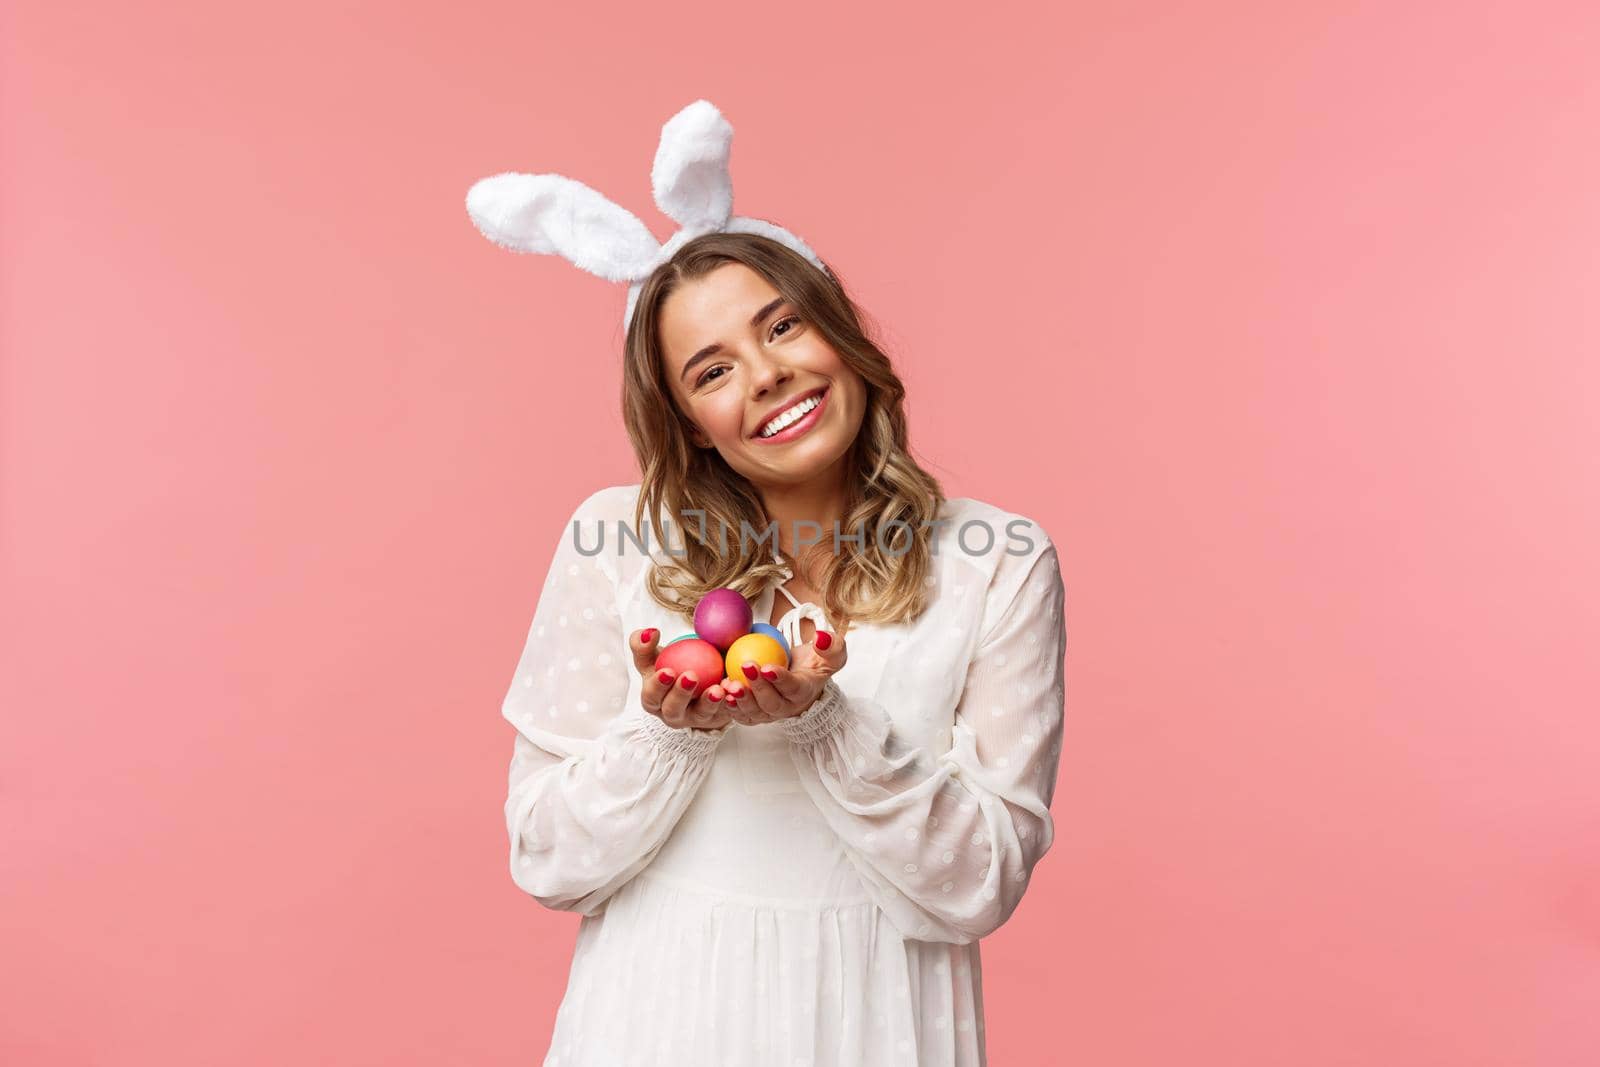 Holidays, spring and party concept. Portrait tender, romantic blond girl in white dress and rabbit ears, tilt head cute, smiling happy as holding painted eggs, celebrating Easter, pink background.